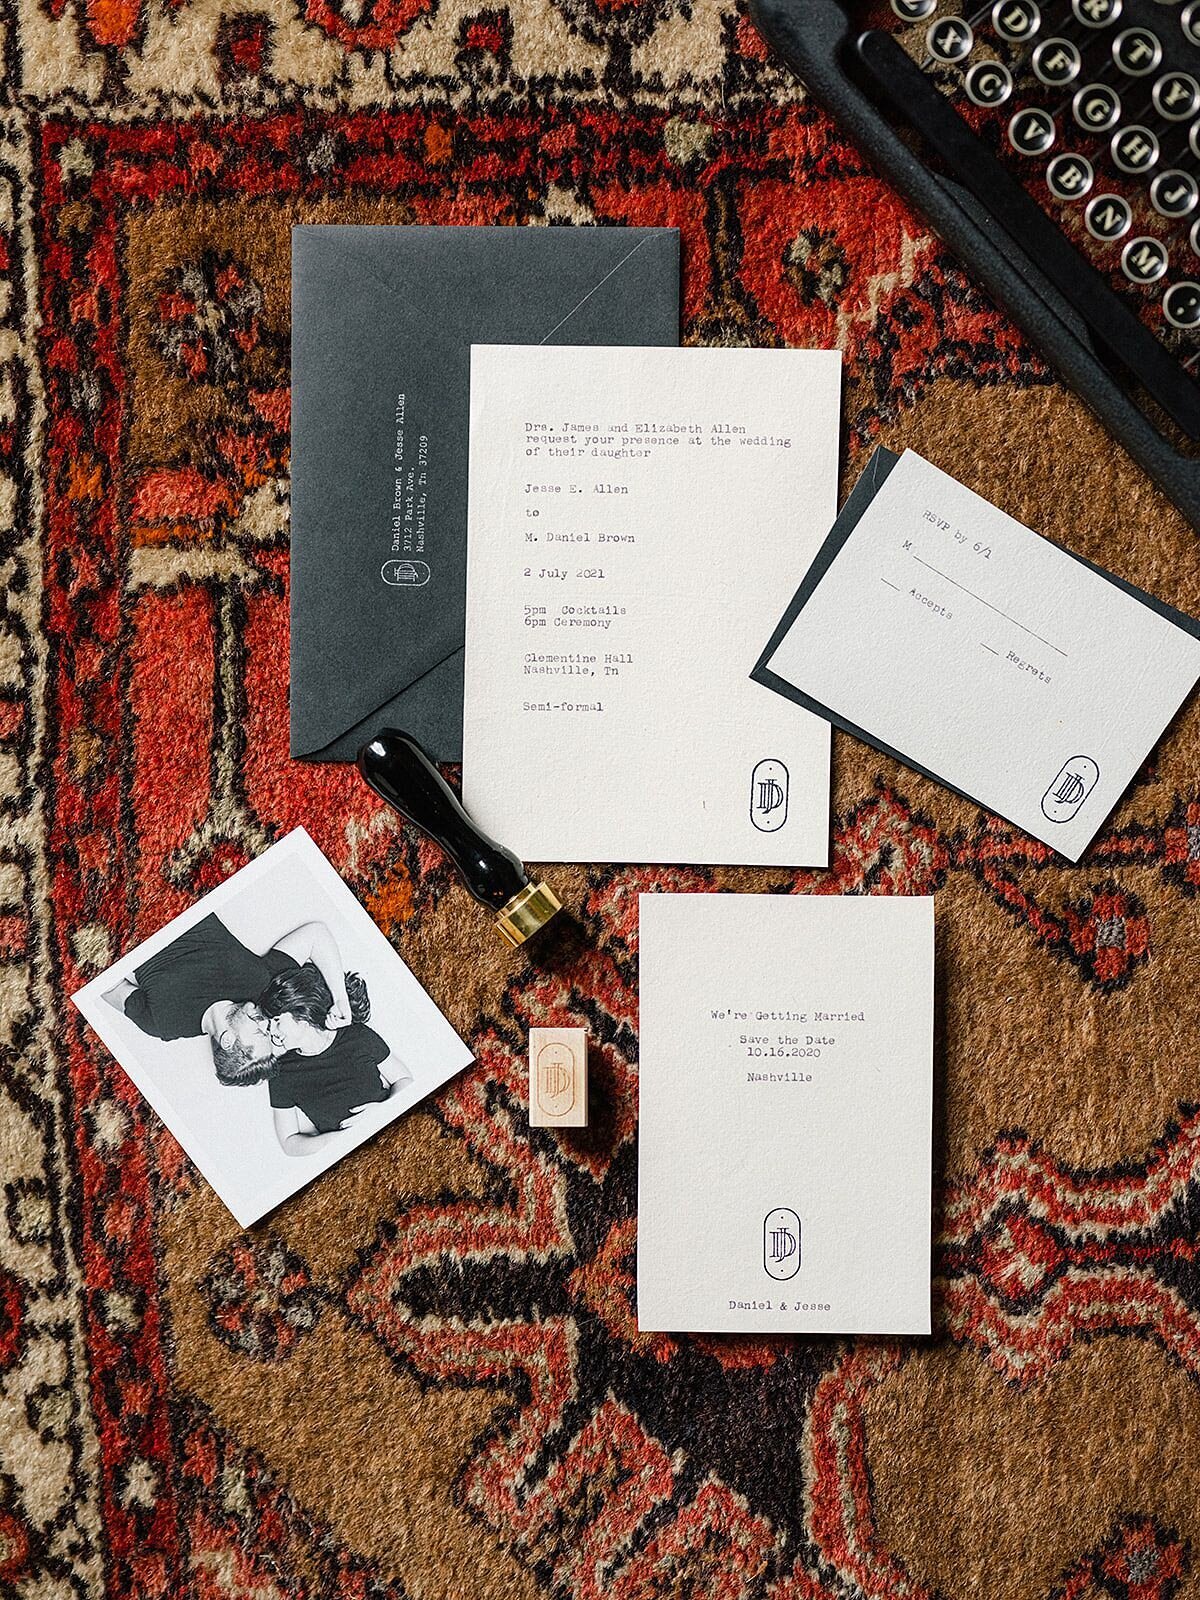 A handmade wedding stationery suite typed on an antique typewriter by the groom, stamped and sealed by the bride before being mailed off to each wedding guest are laid out on an oriental carpet.